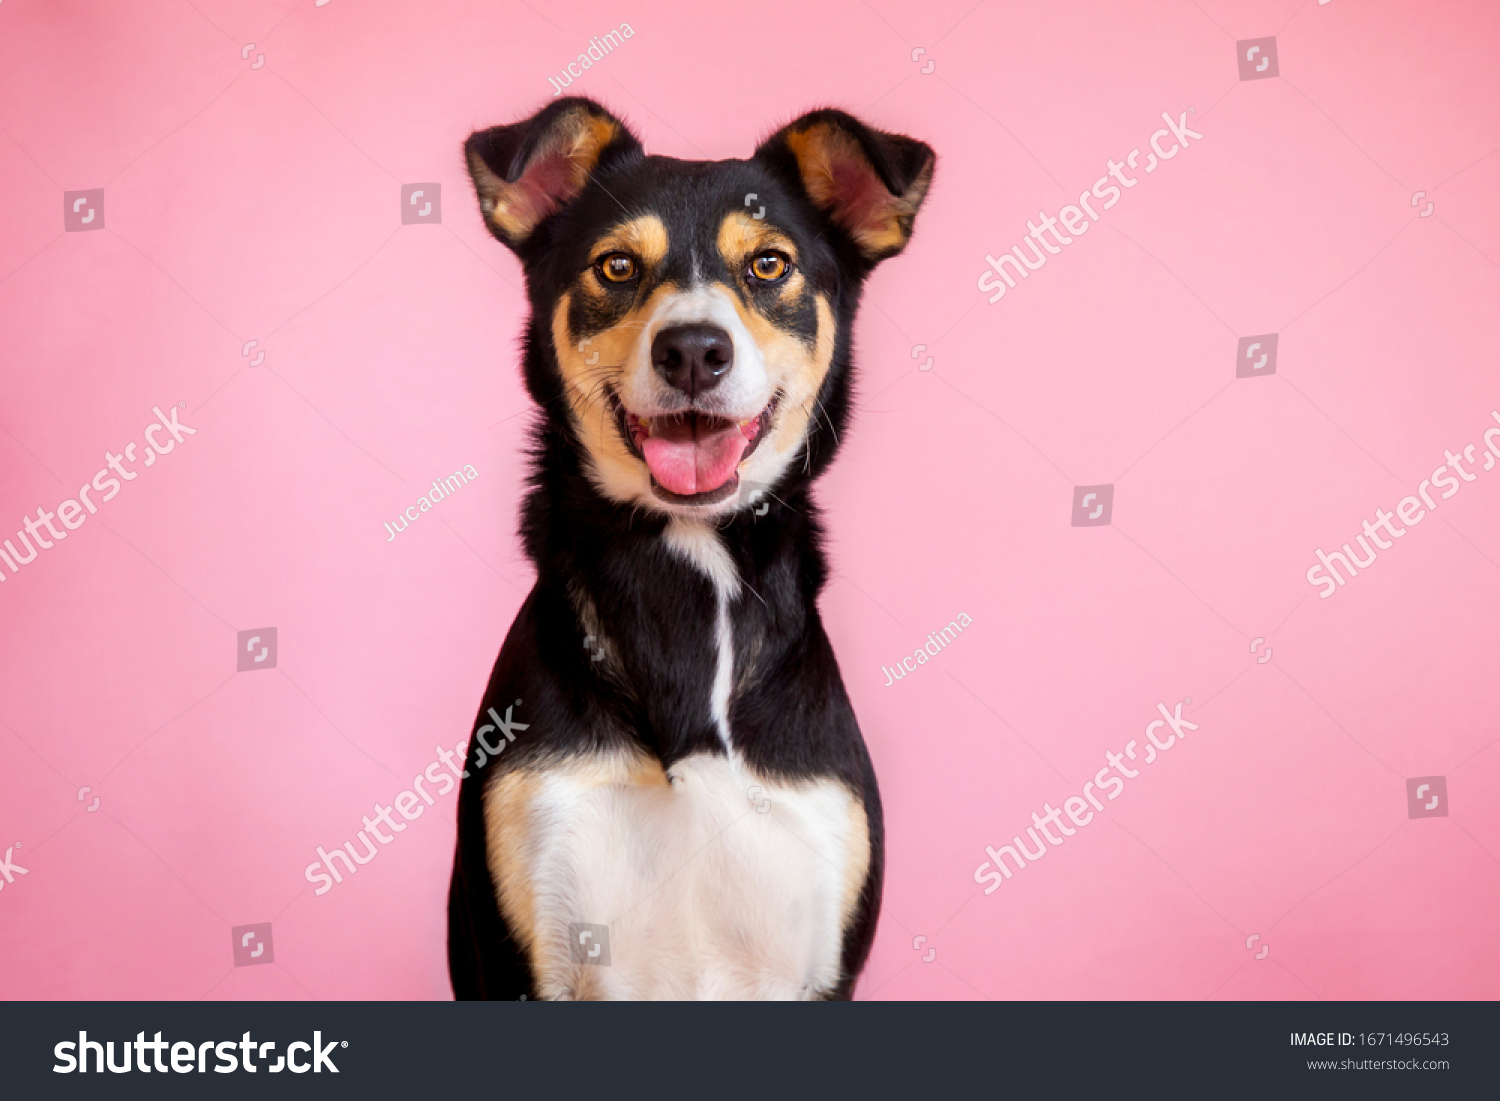 female dog in pink background. pet portraits. happy animals #1671496543